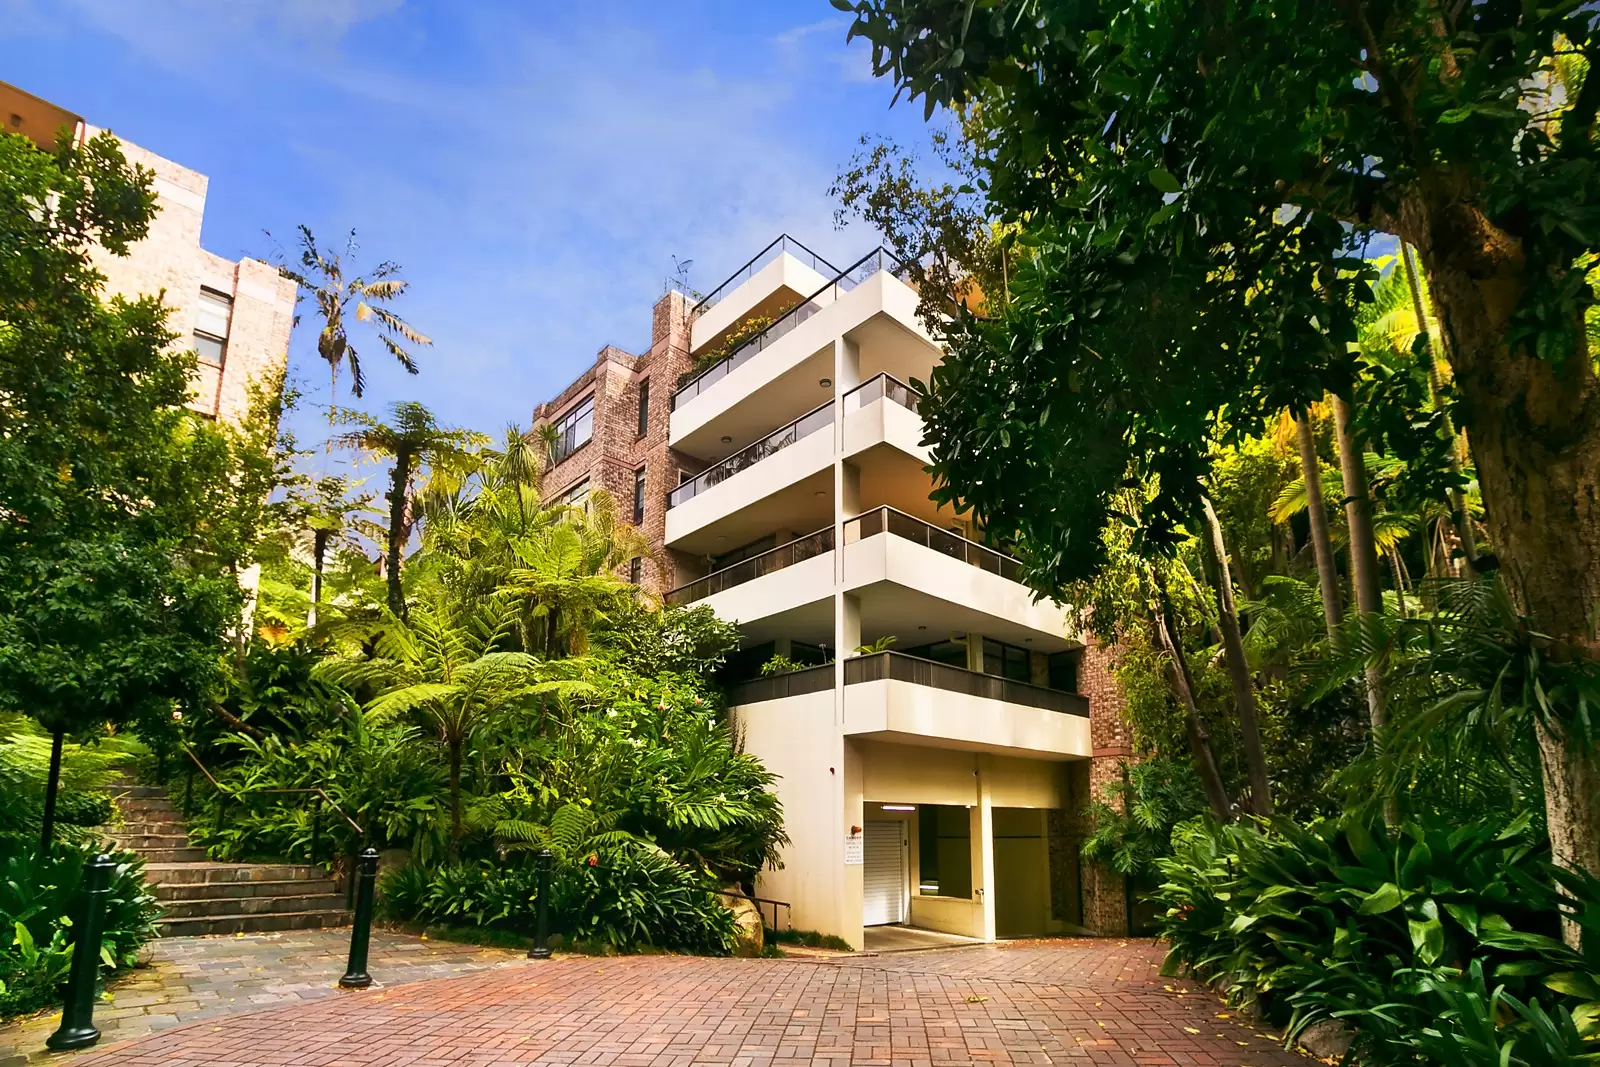 Photo #7: 28/337 New South Head Road, Double Bay - Sold by Sydney Sotheby's International Realty